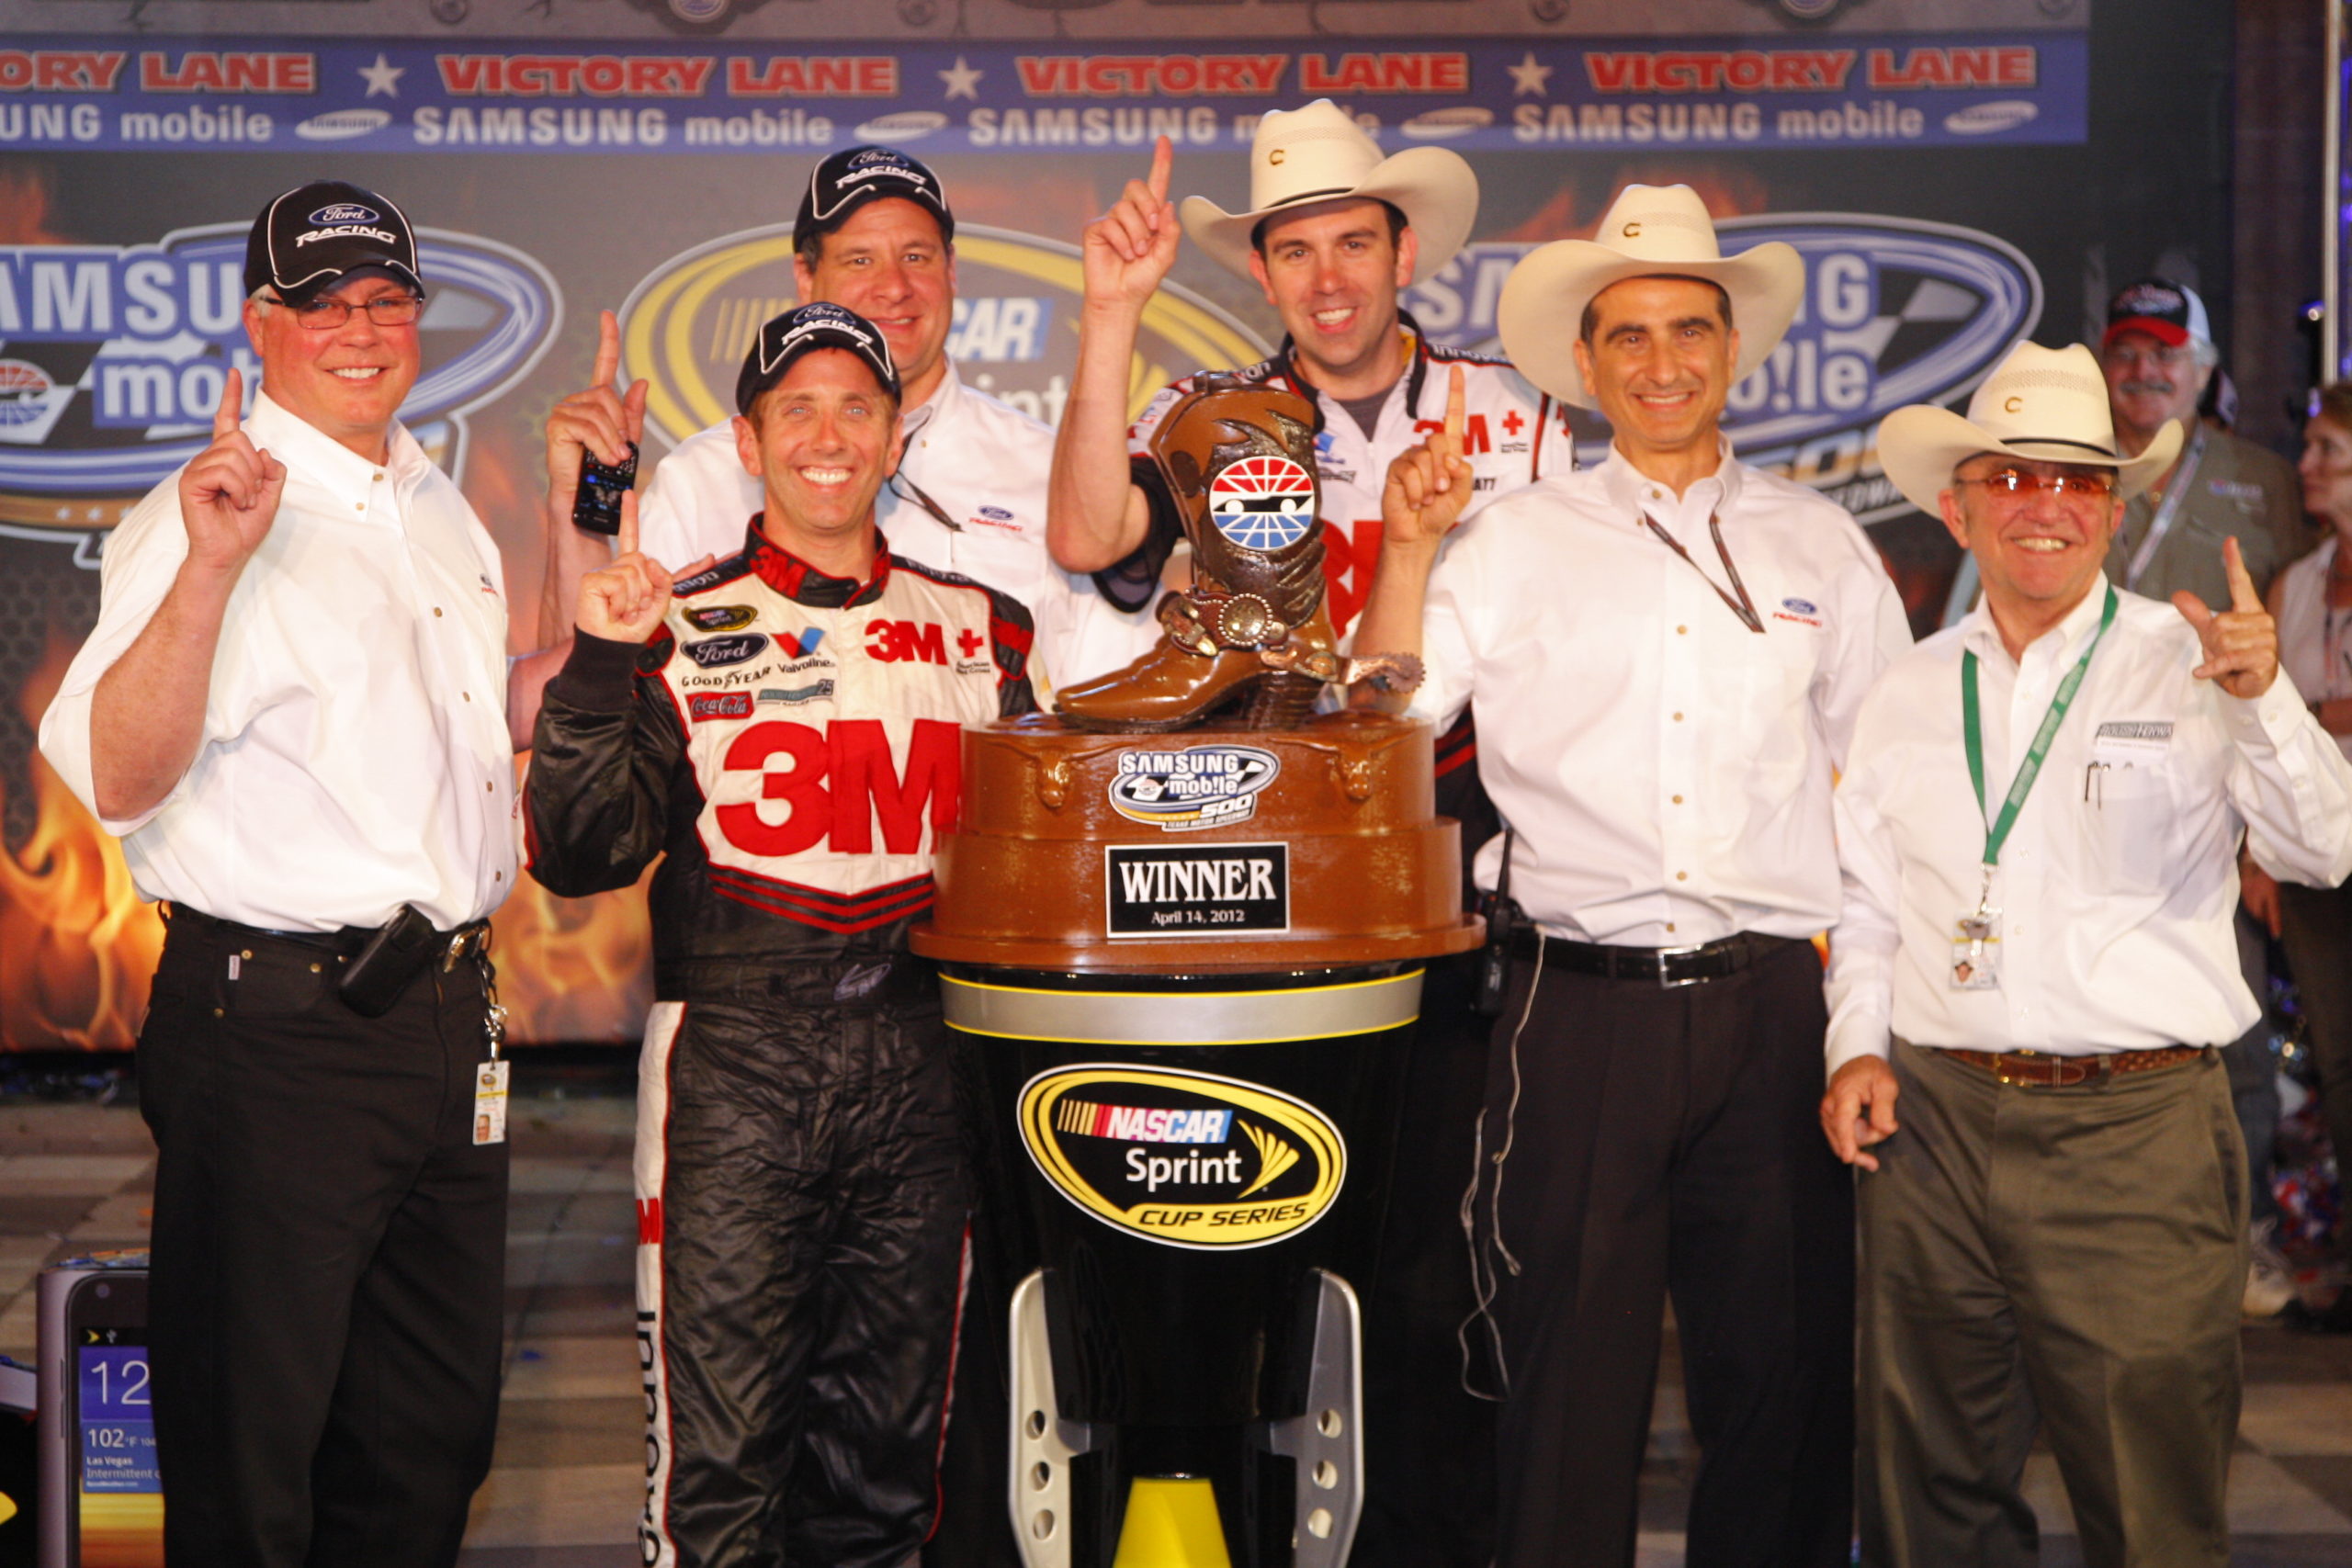 Biffle to Make Return Behind the Wheel of Roush Fenway’s No. 16 Ford